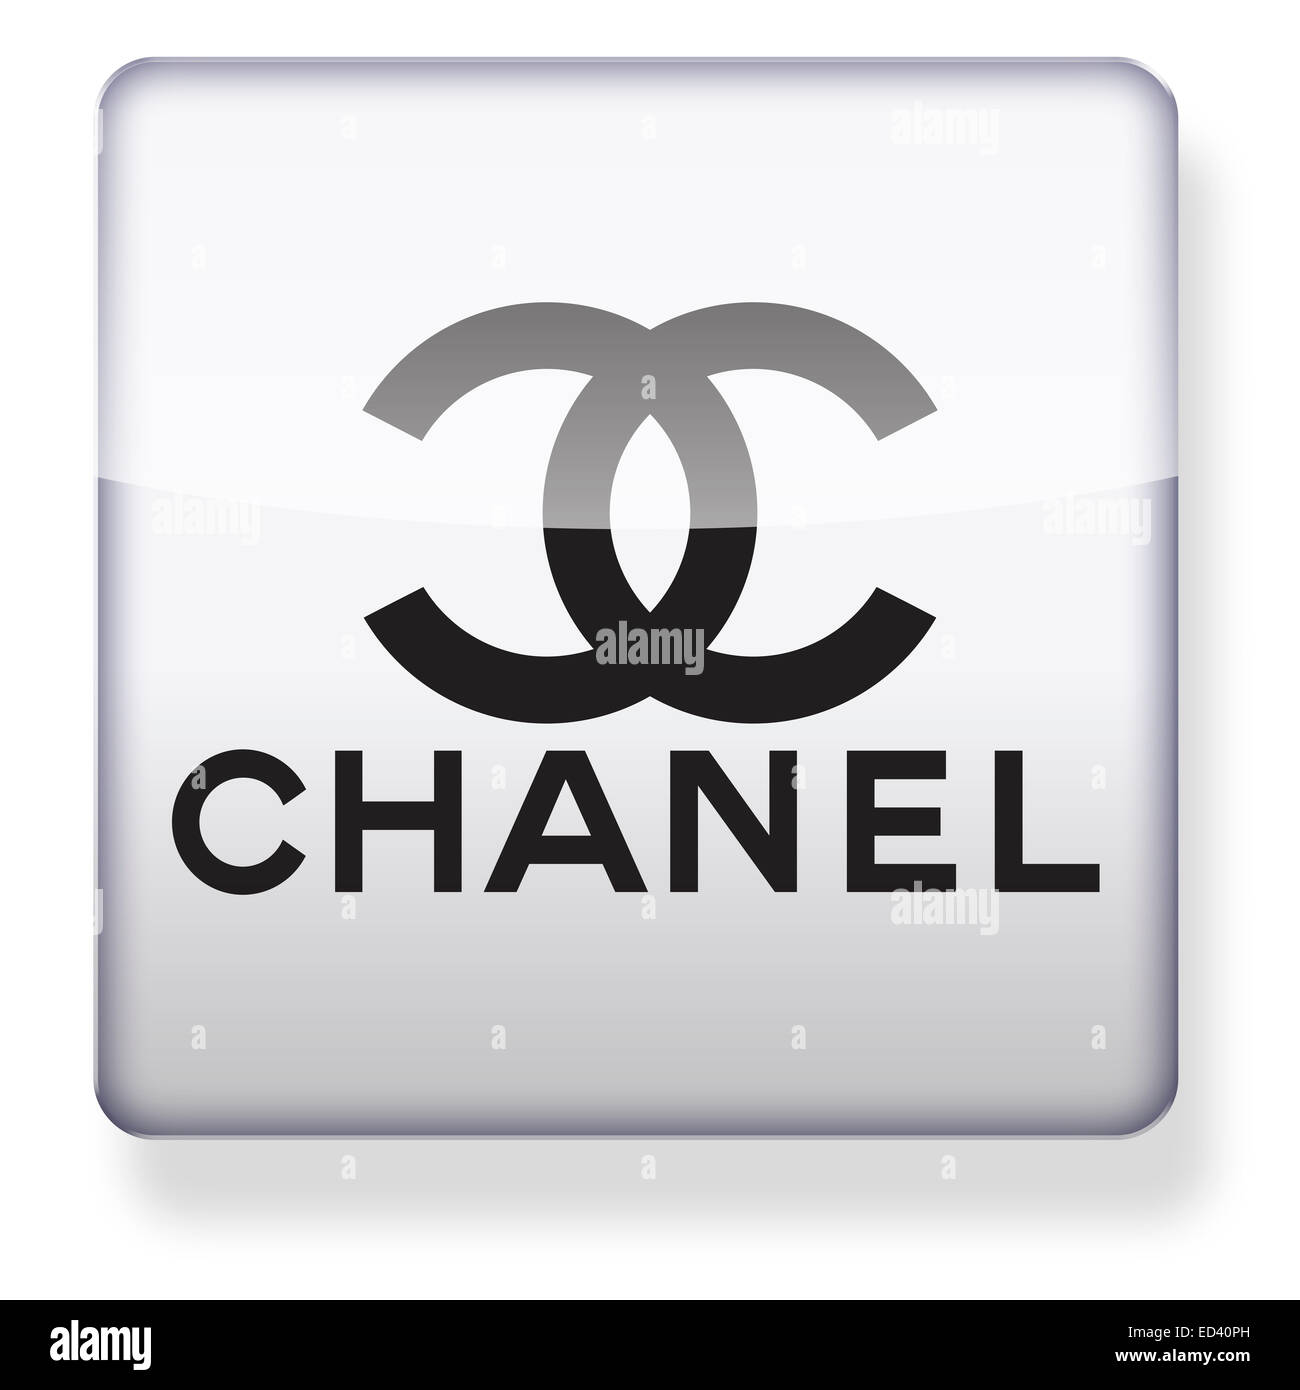 Chanel logo as an app icon. Clipping path included. Stock Photo